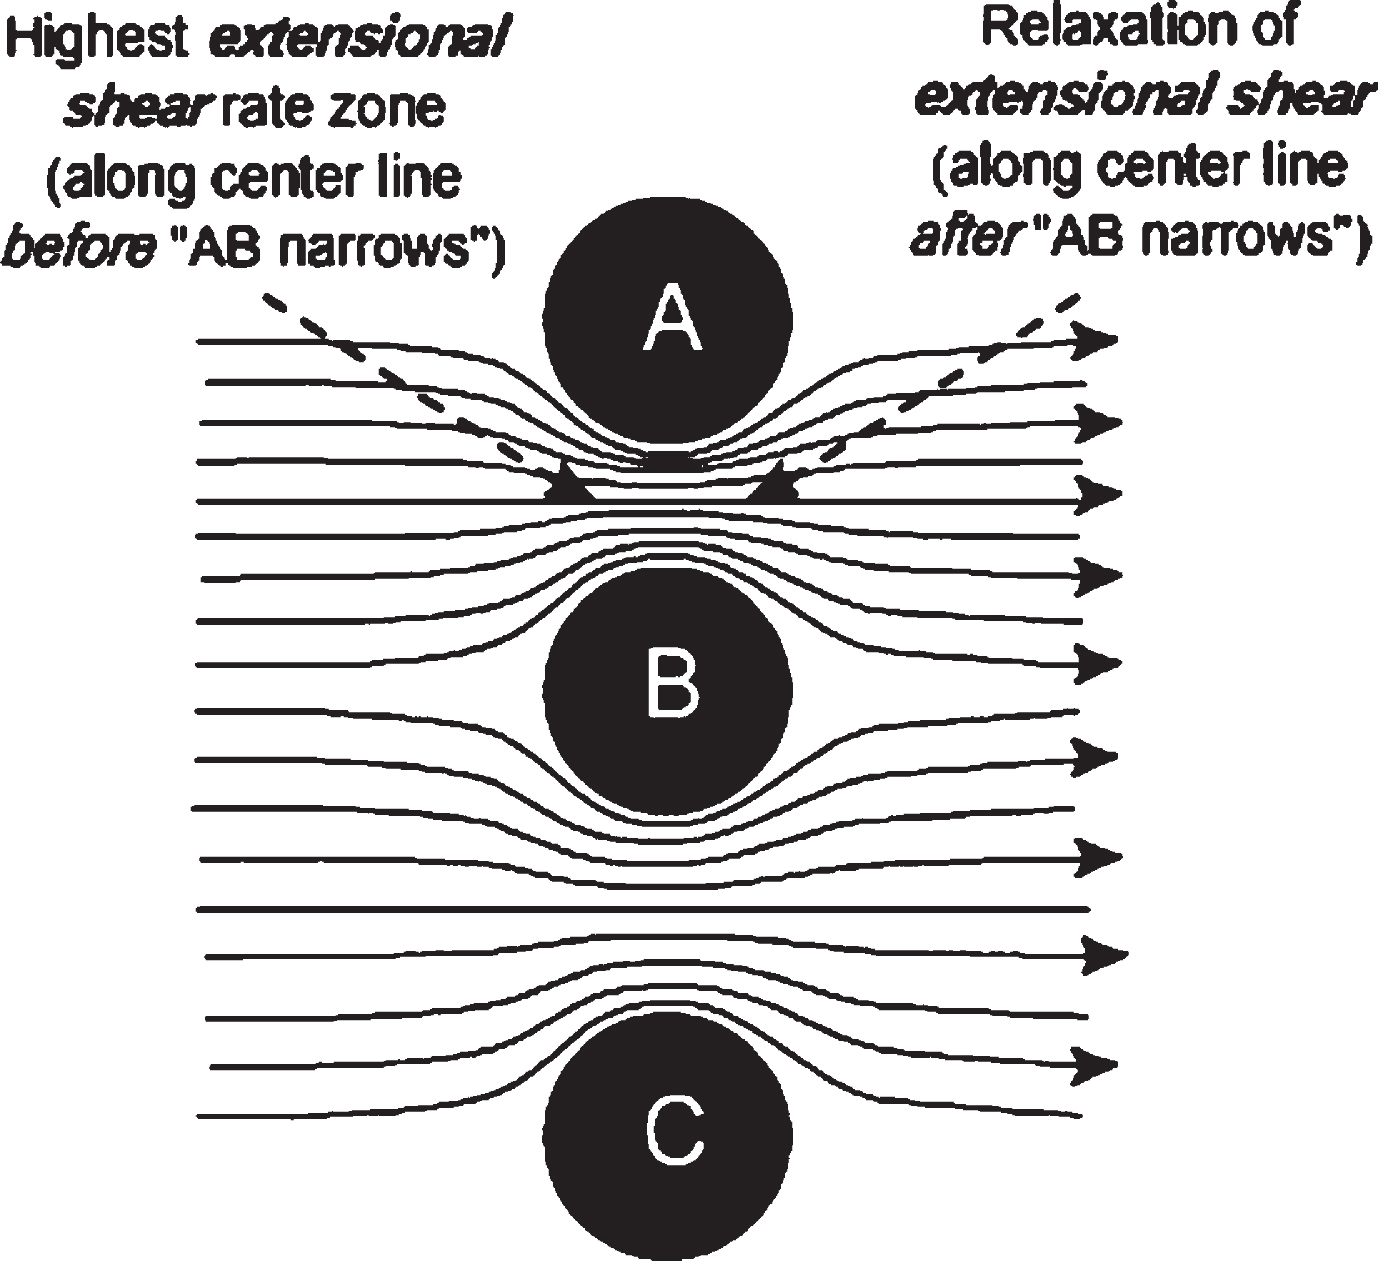 In both cases, extensional shear is found on the left side. A lower extensional shear rate is found between B and C. Predominant laminar shear is found close to A, B, and C surfaces.